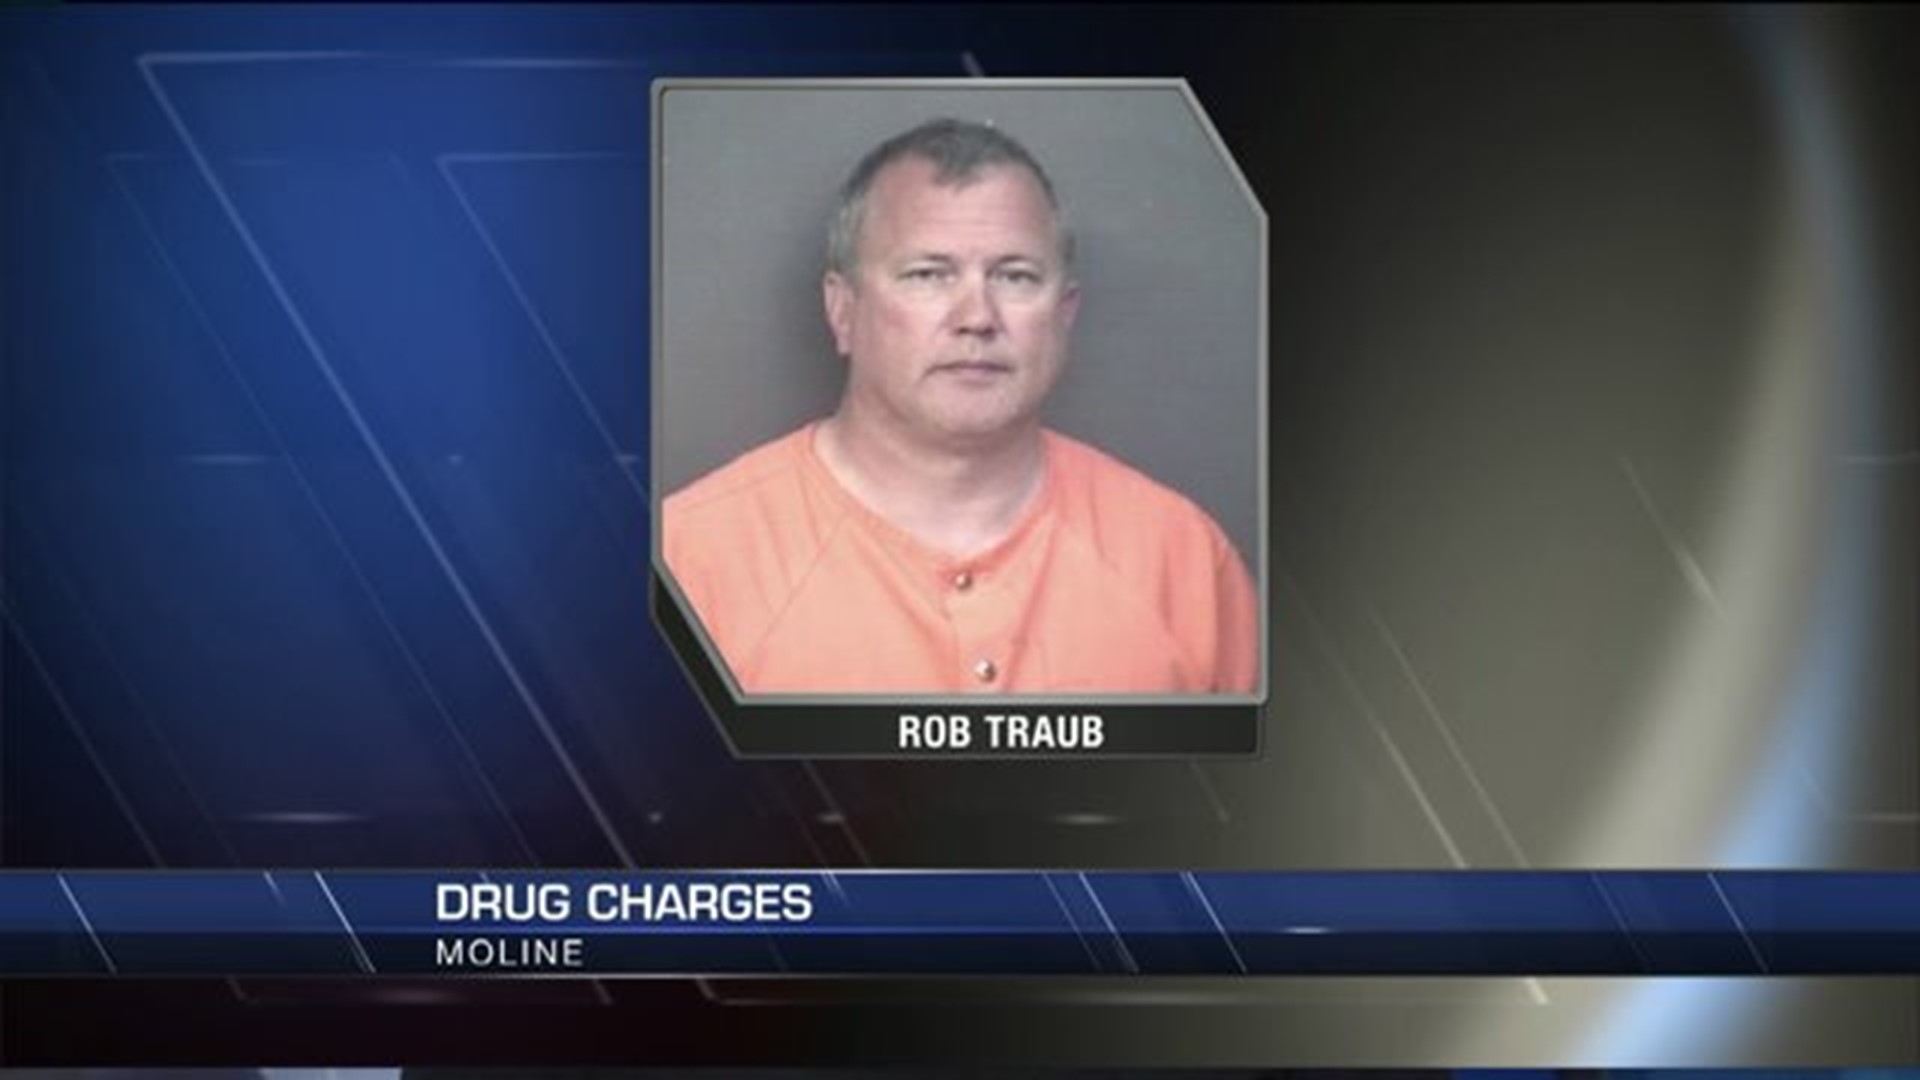 Police say Moline cocaine dealer buster in undercover sting